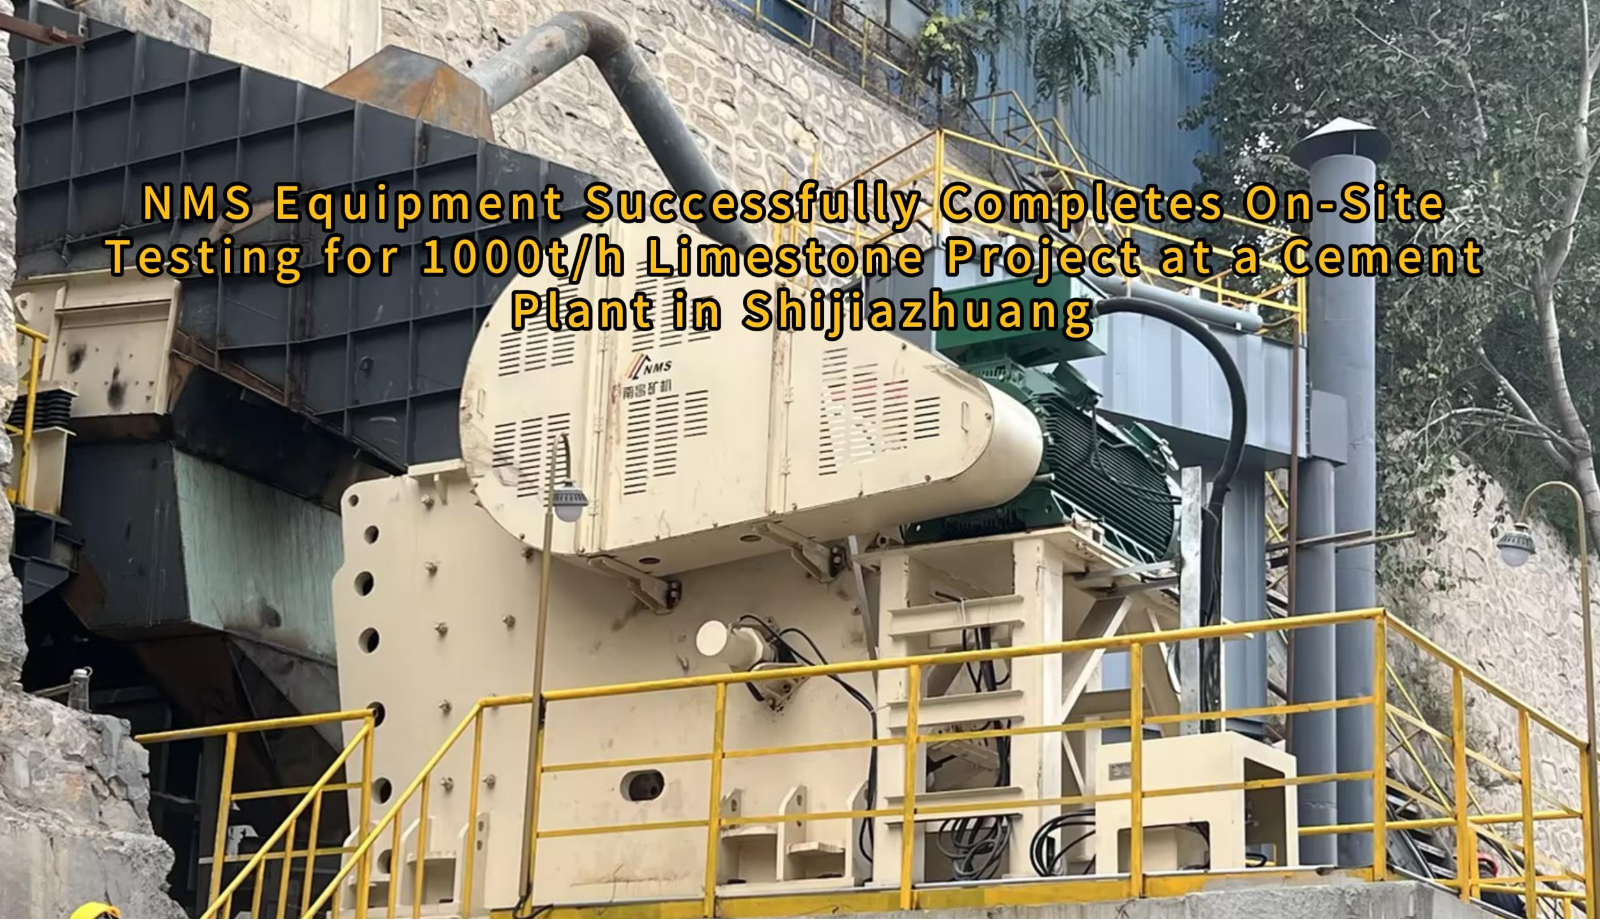 NMS Equipment Successfully Completes On-Site Testing for 1000t/h Limestone Project at a Cement Plant in Shijiazhuang